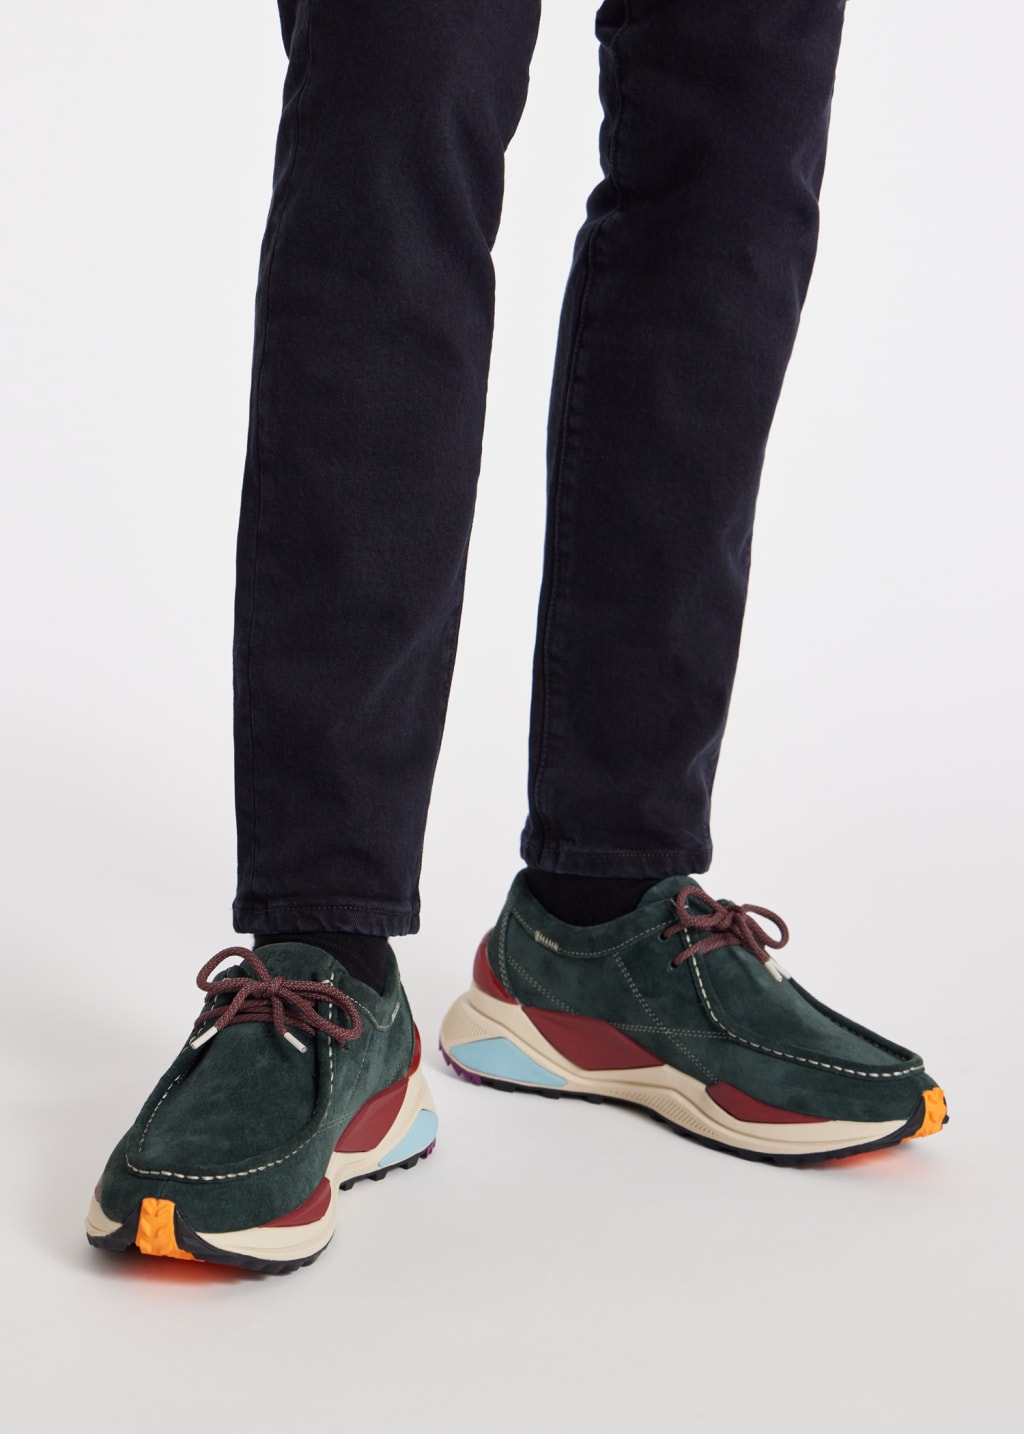 Model View - Green Suede 'Stirling' Shoes Paul Smith